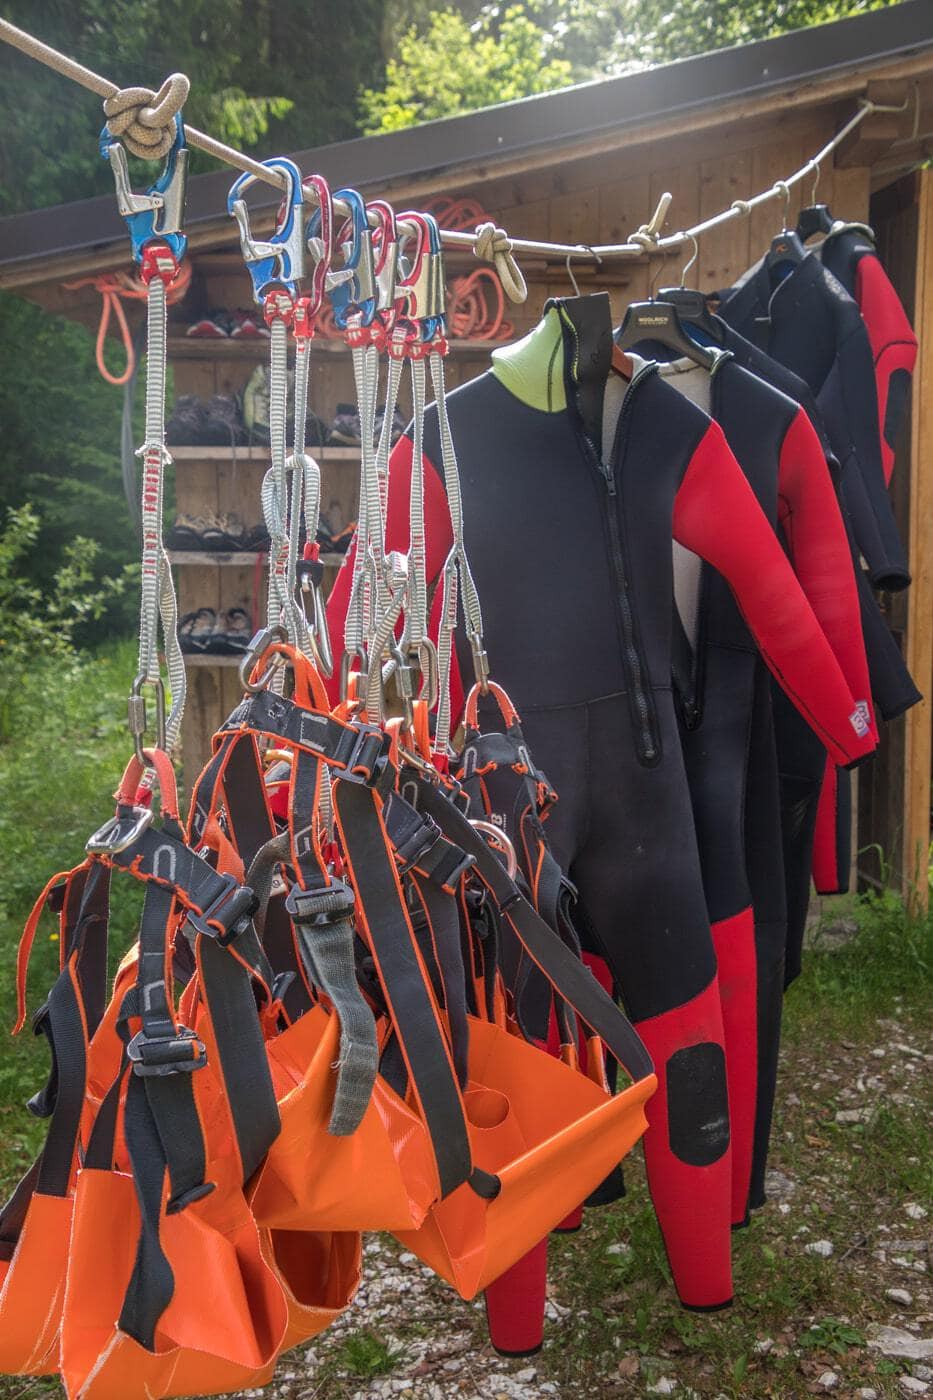 canyoning suits hanging and waiting to be put on